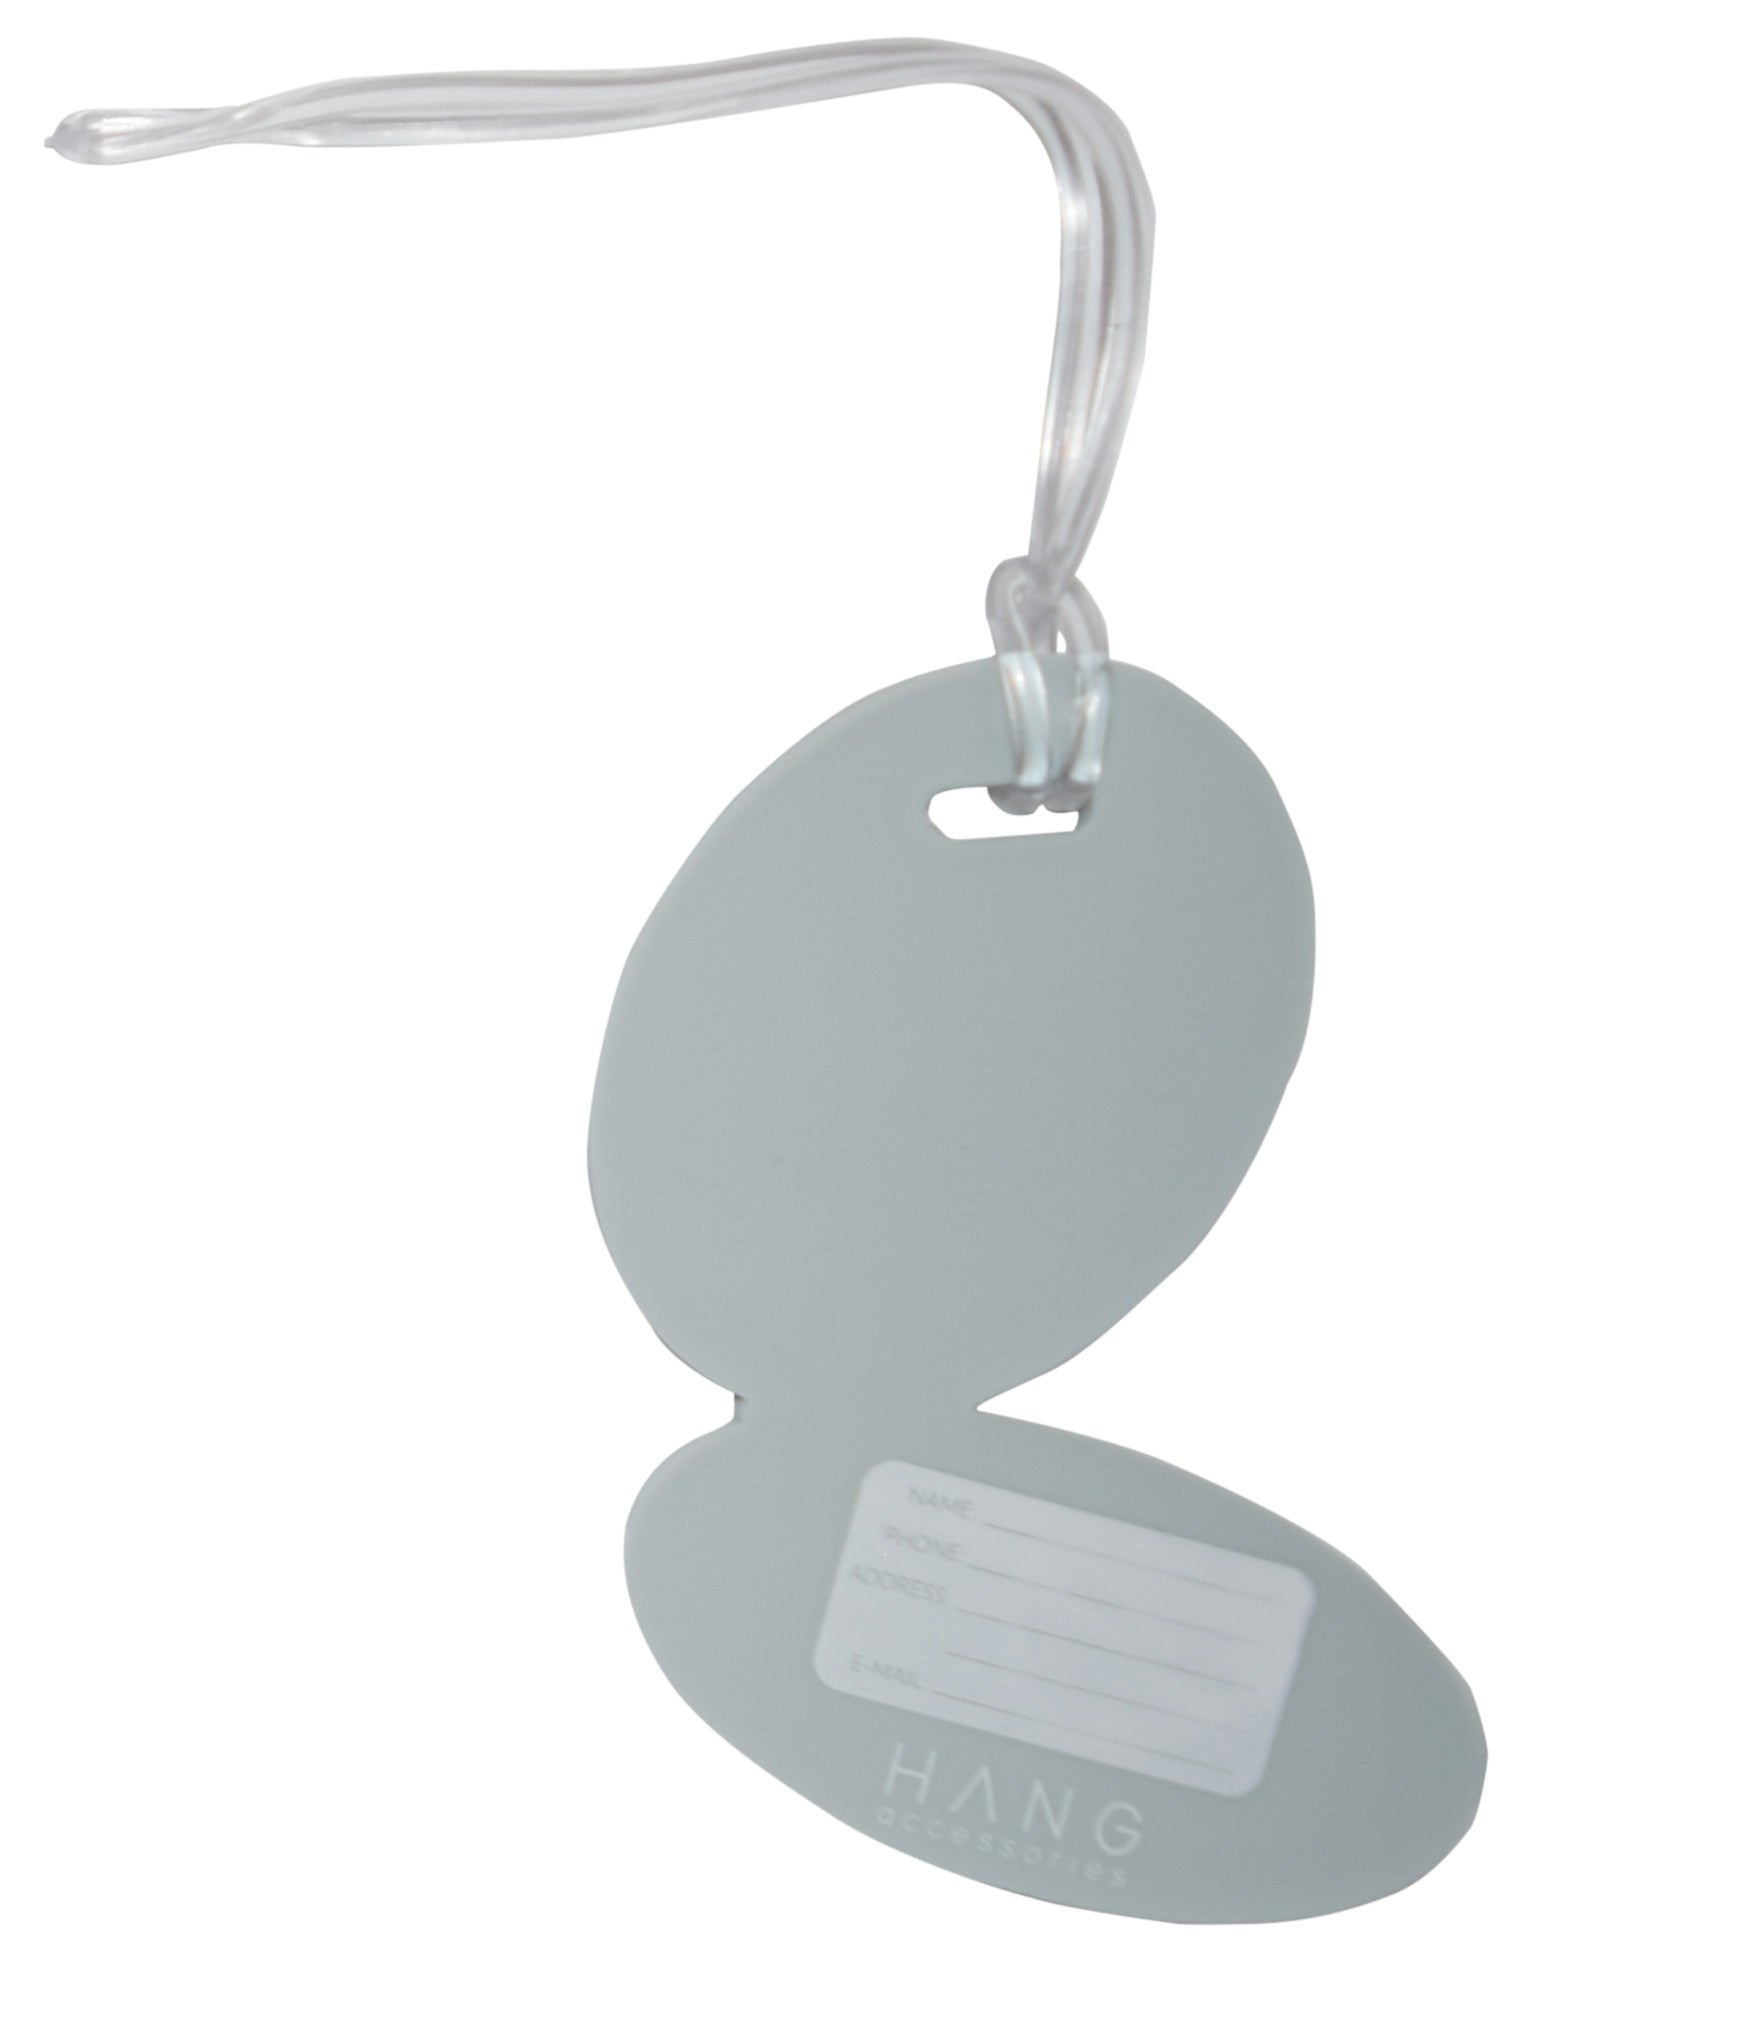 Silicone Luggage Tag Compact Mirror